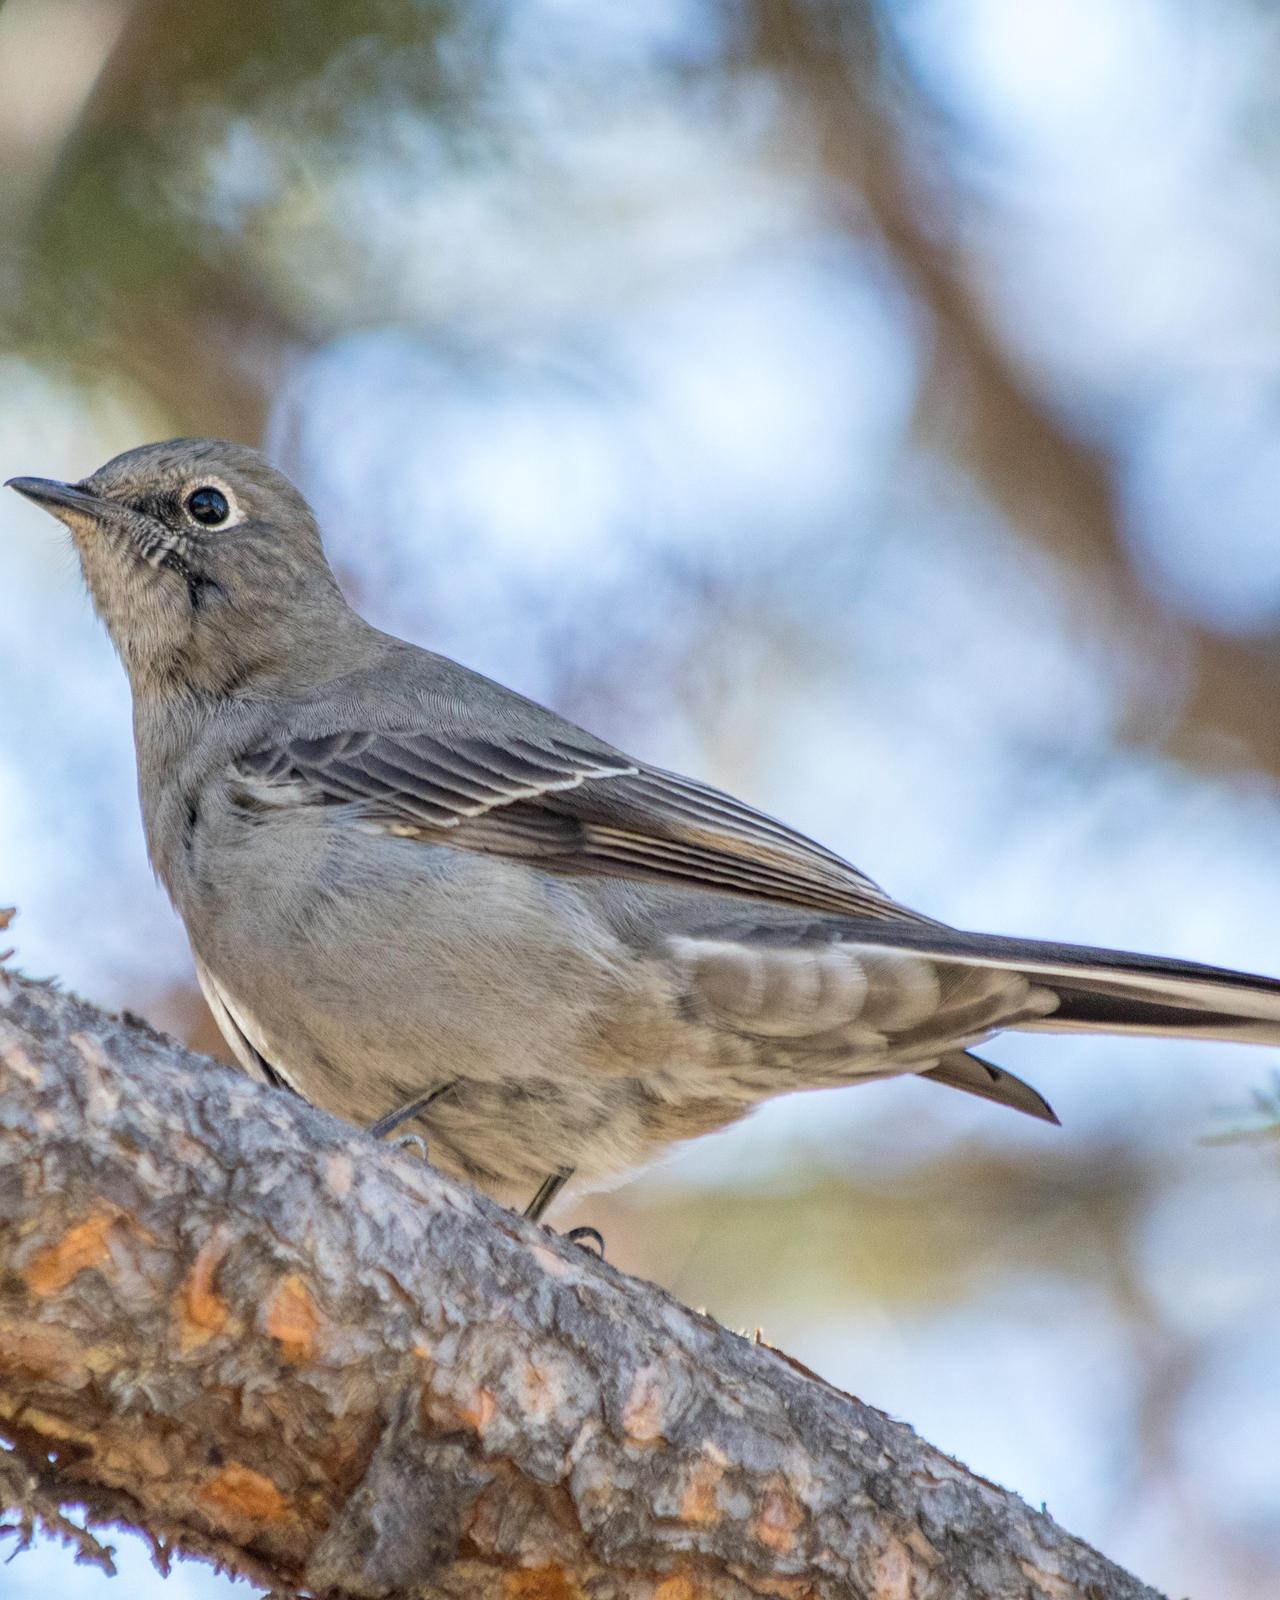 Townsend's Solitaire Photo by Mark Baldwin